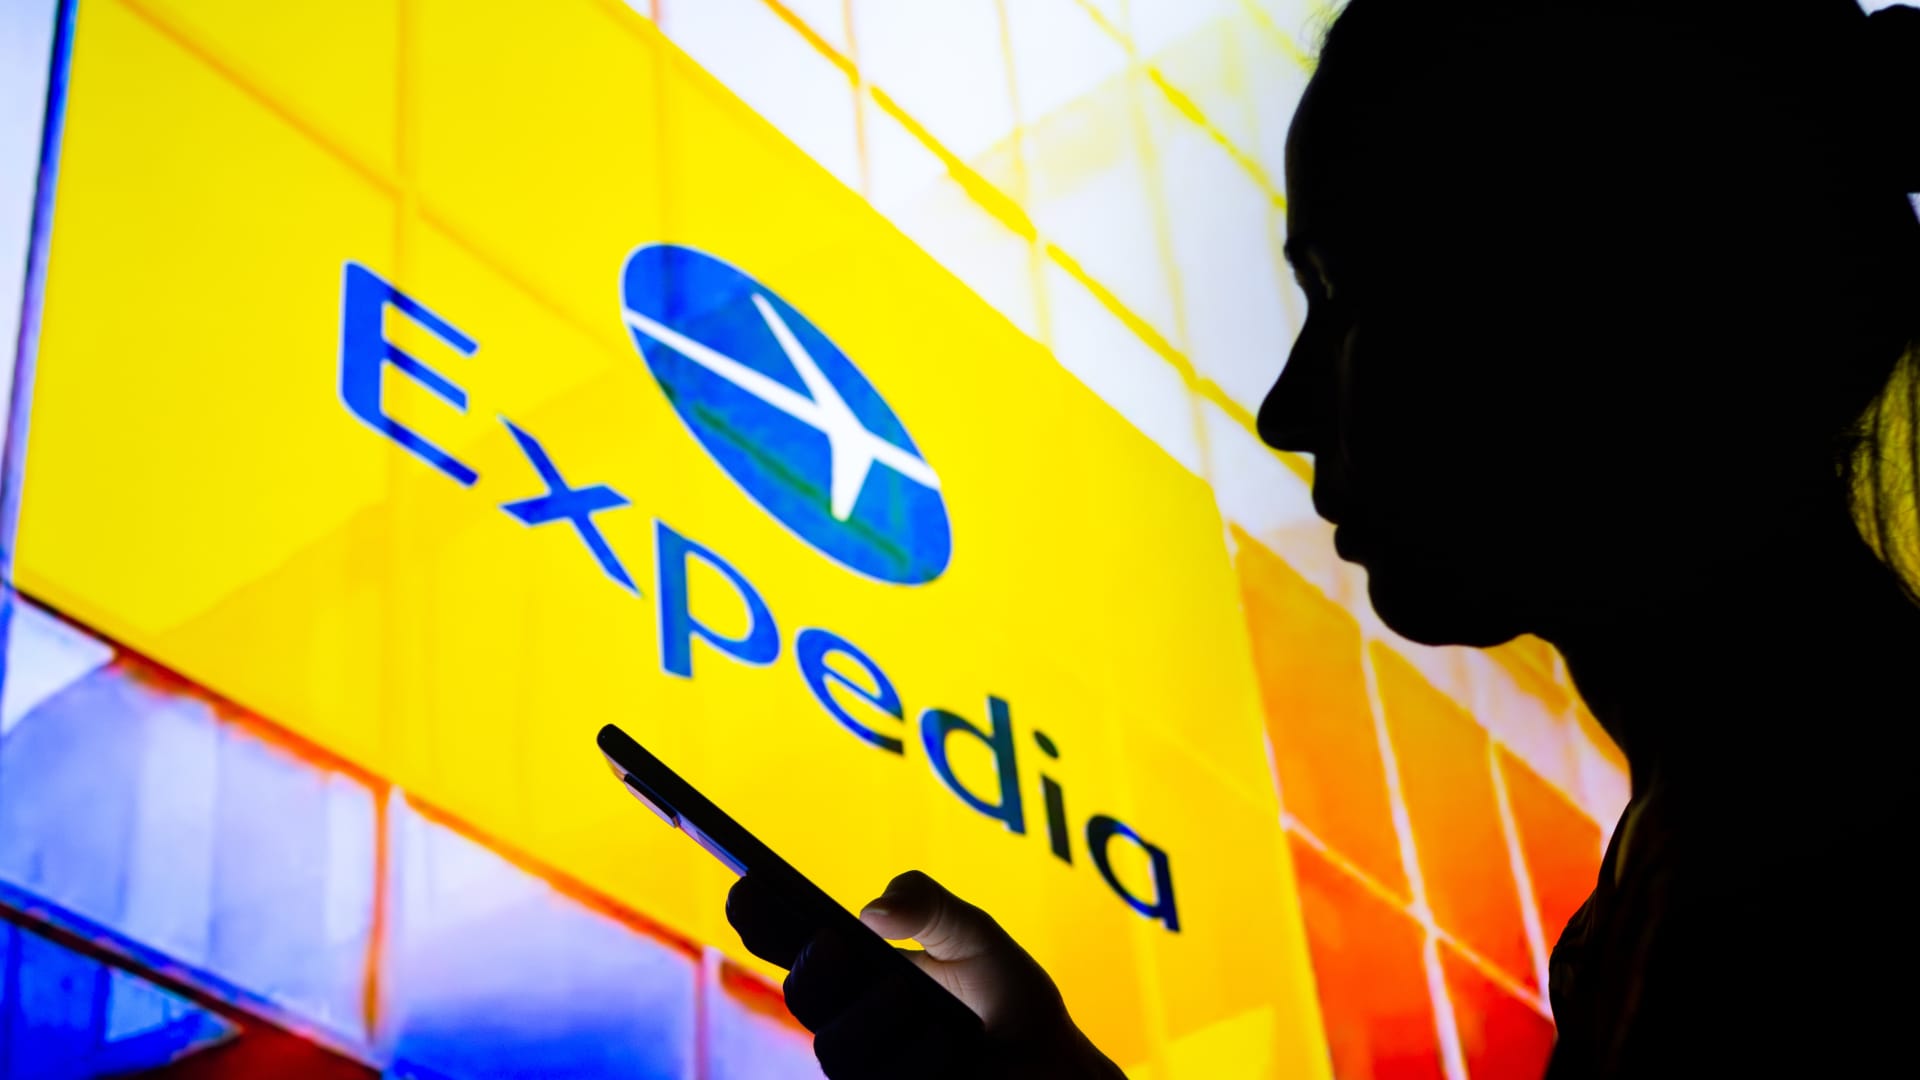 Expedia CEO: ‘Business travel is back’ like I predicted all along during the Covid pandemic